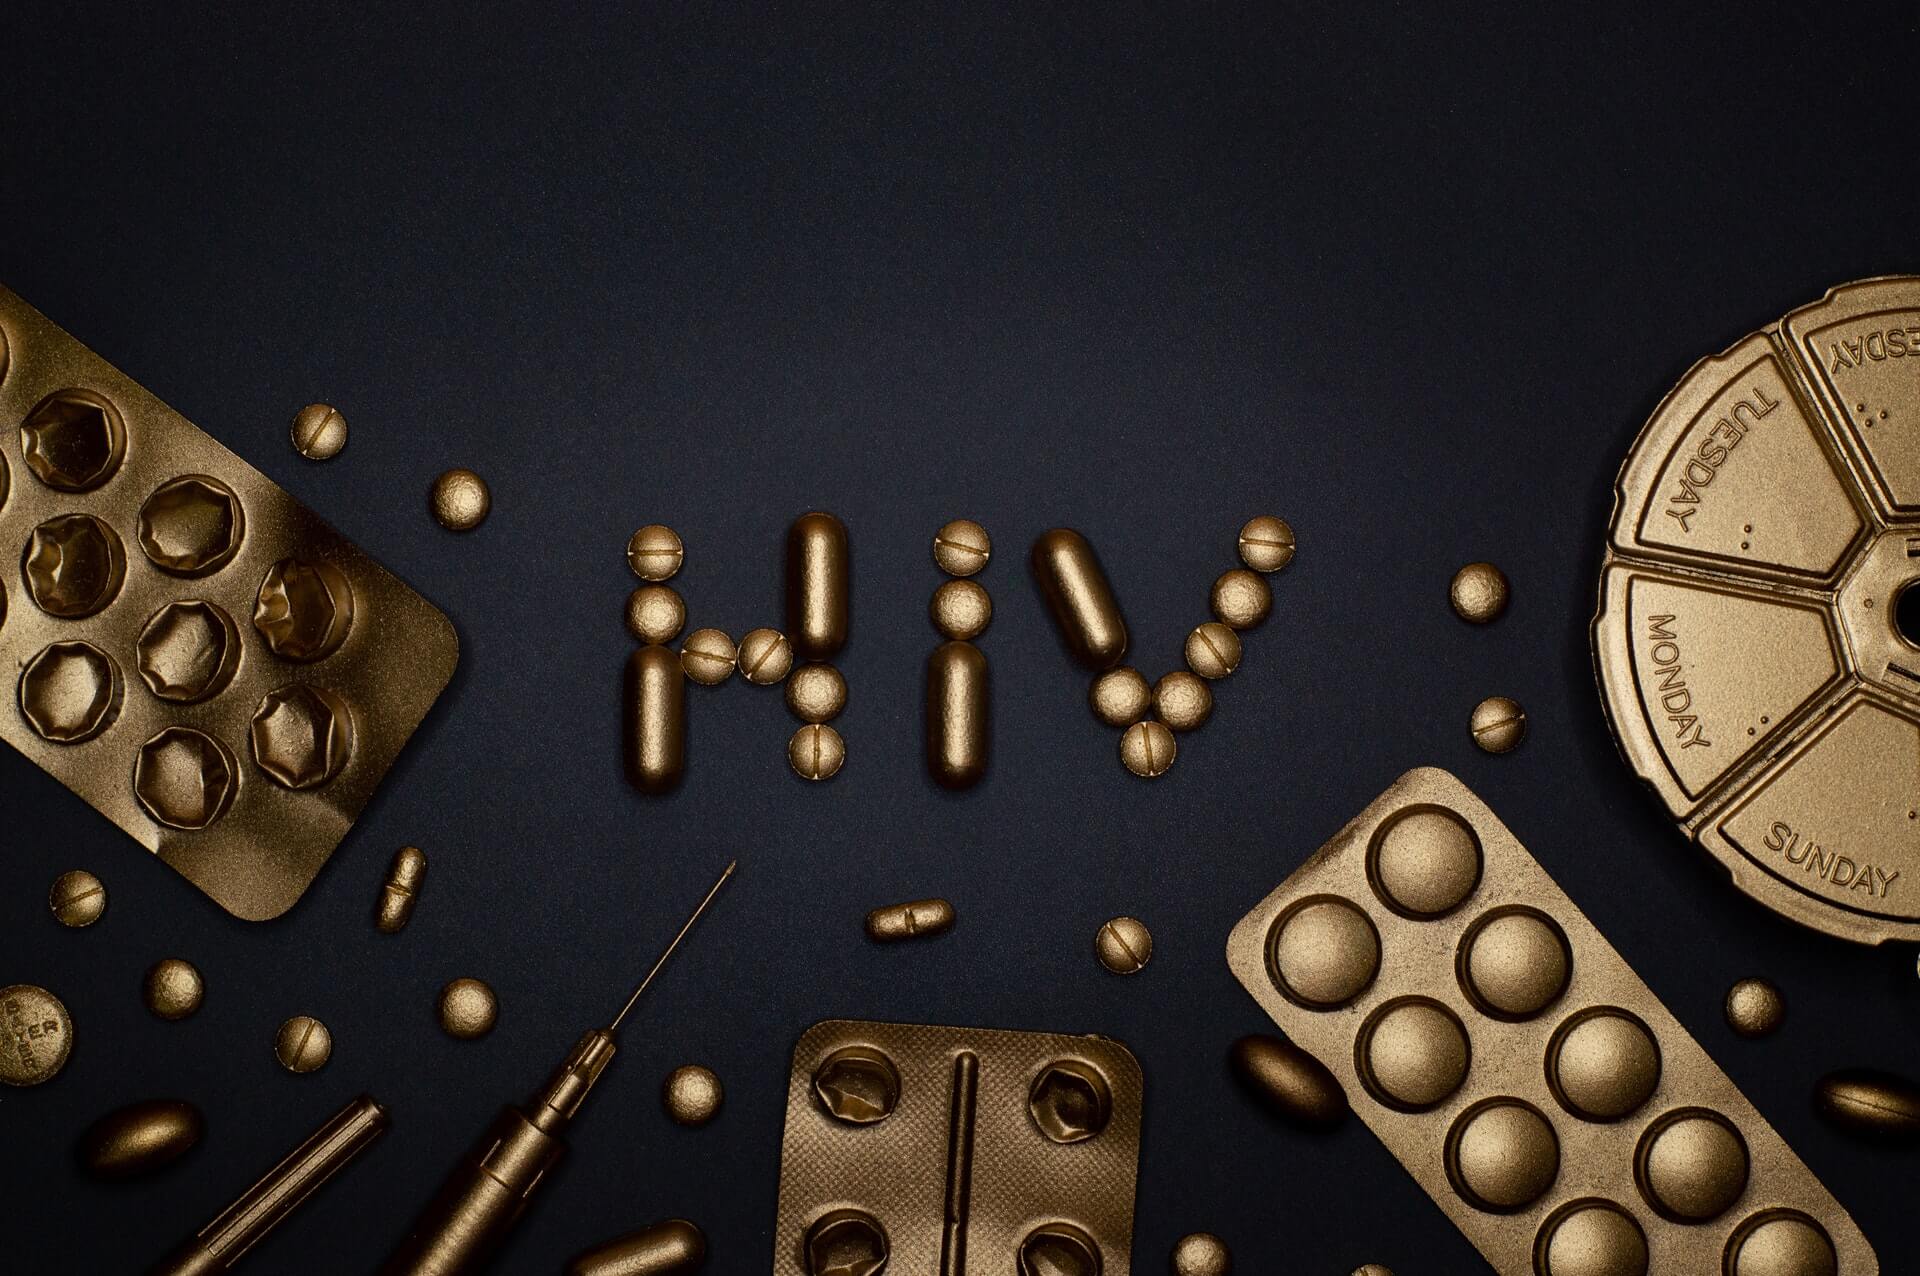 More Aggressive HIV Strain That Leads to AIDS Twice as Fast is Discovered in the Netherlands